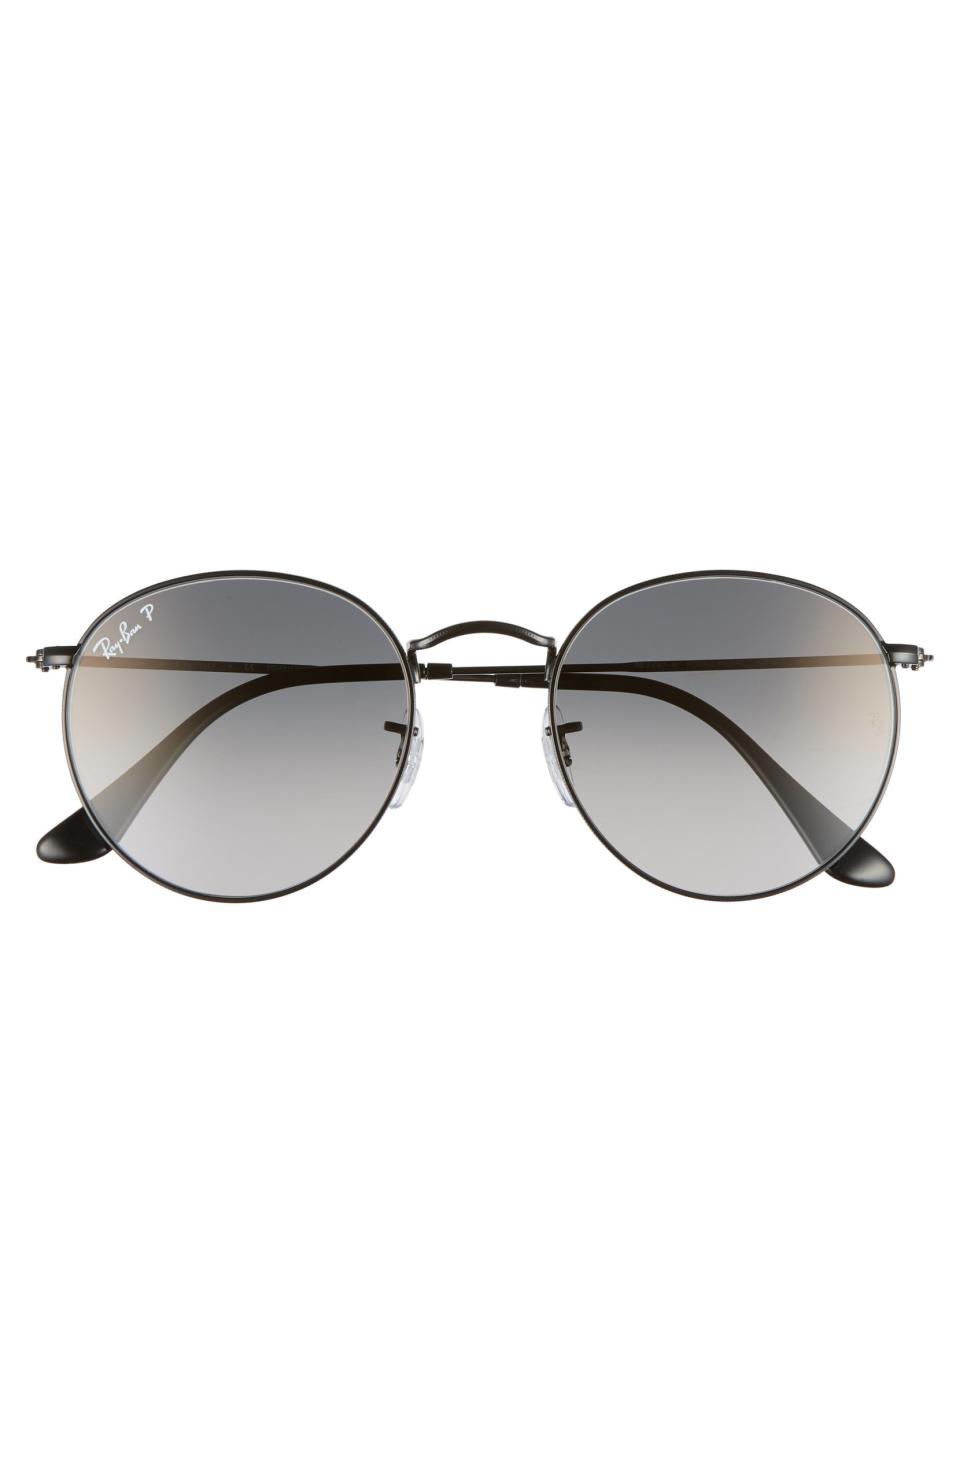 Ray-Ban 53mm Polarized Round Sunglasses, $203 $135.90, Nordstrom